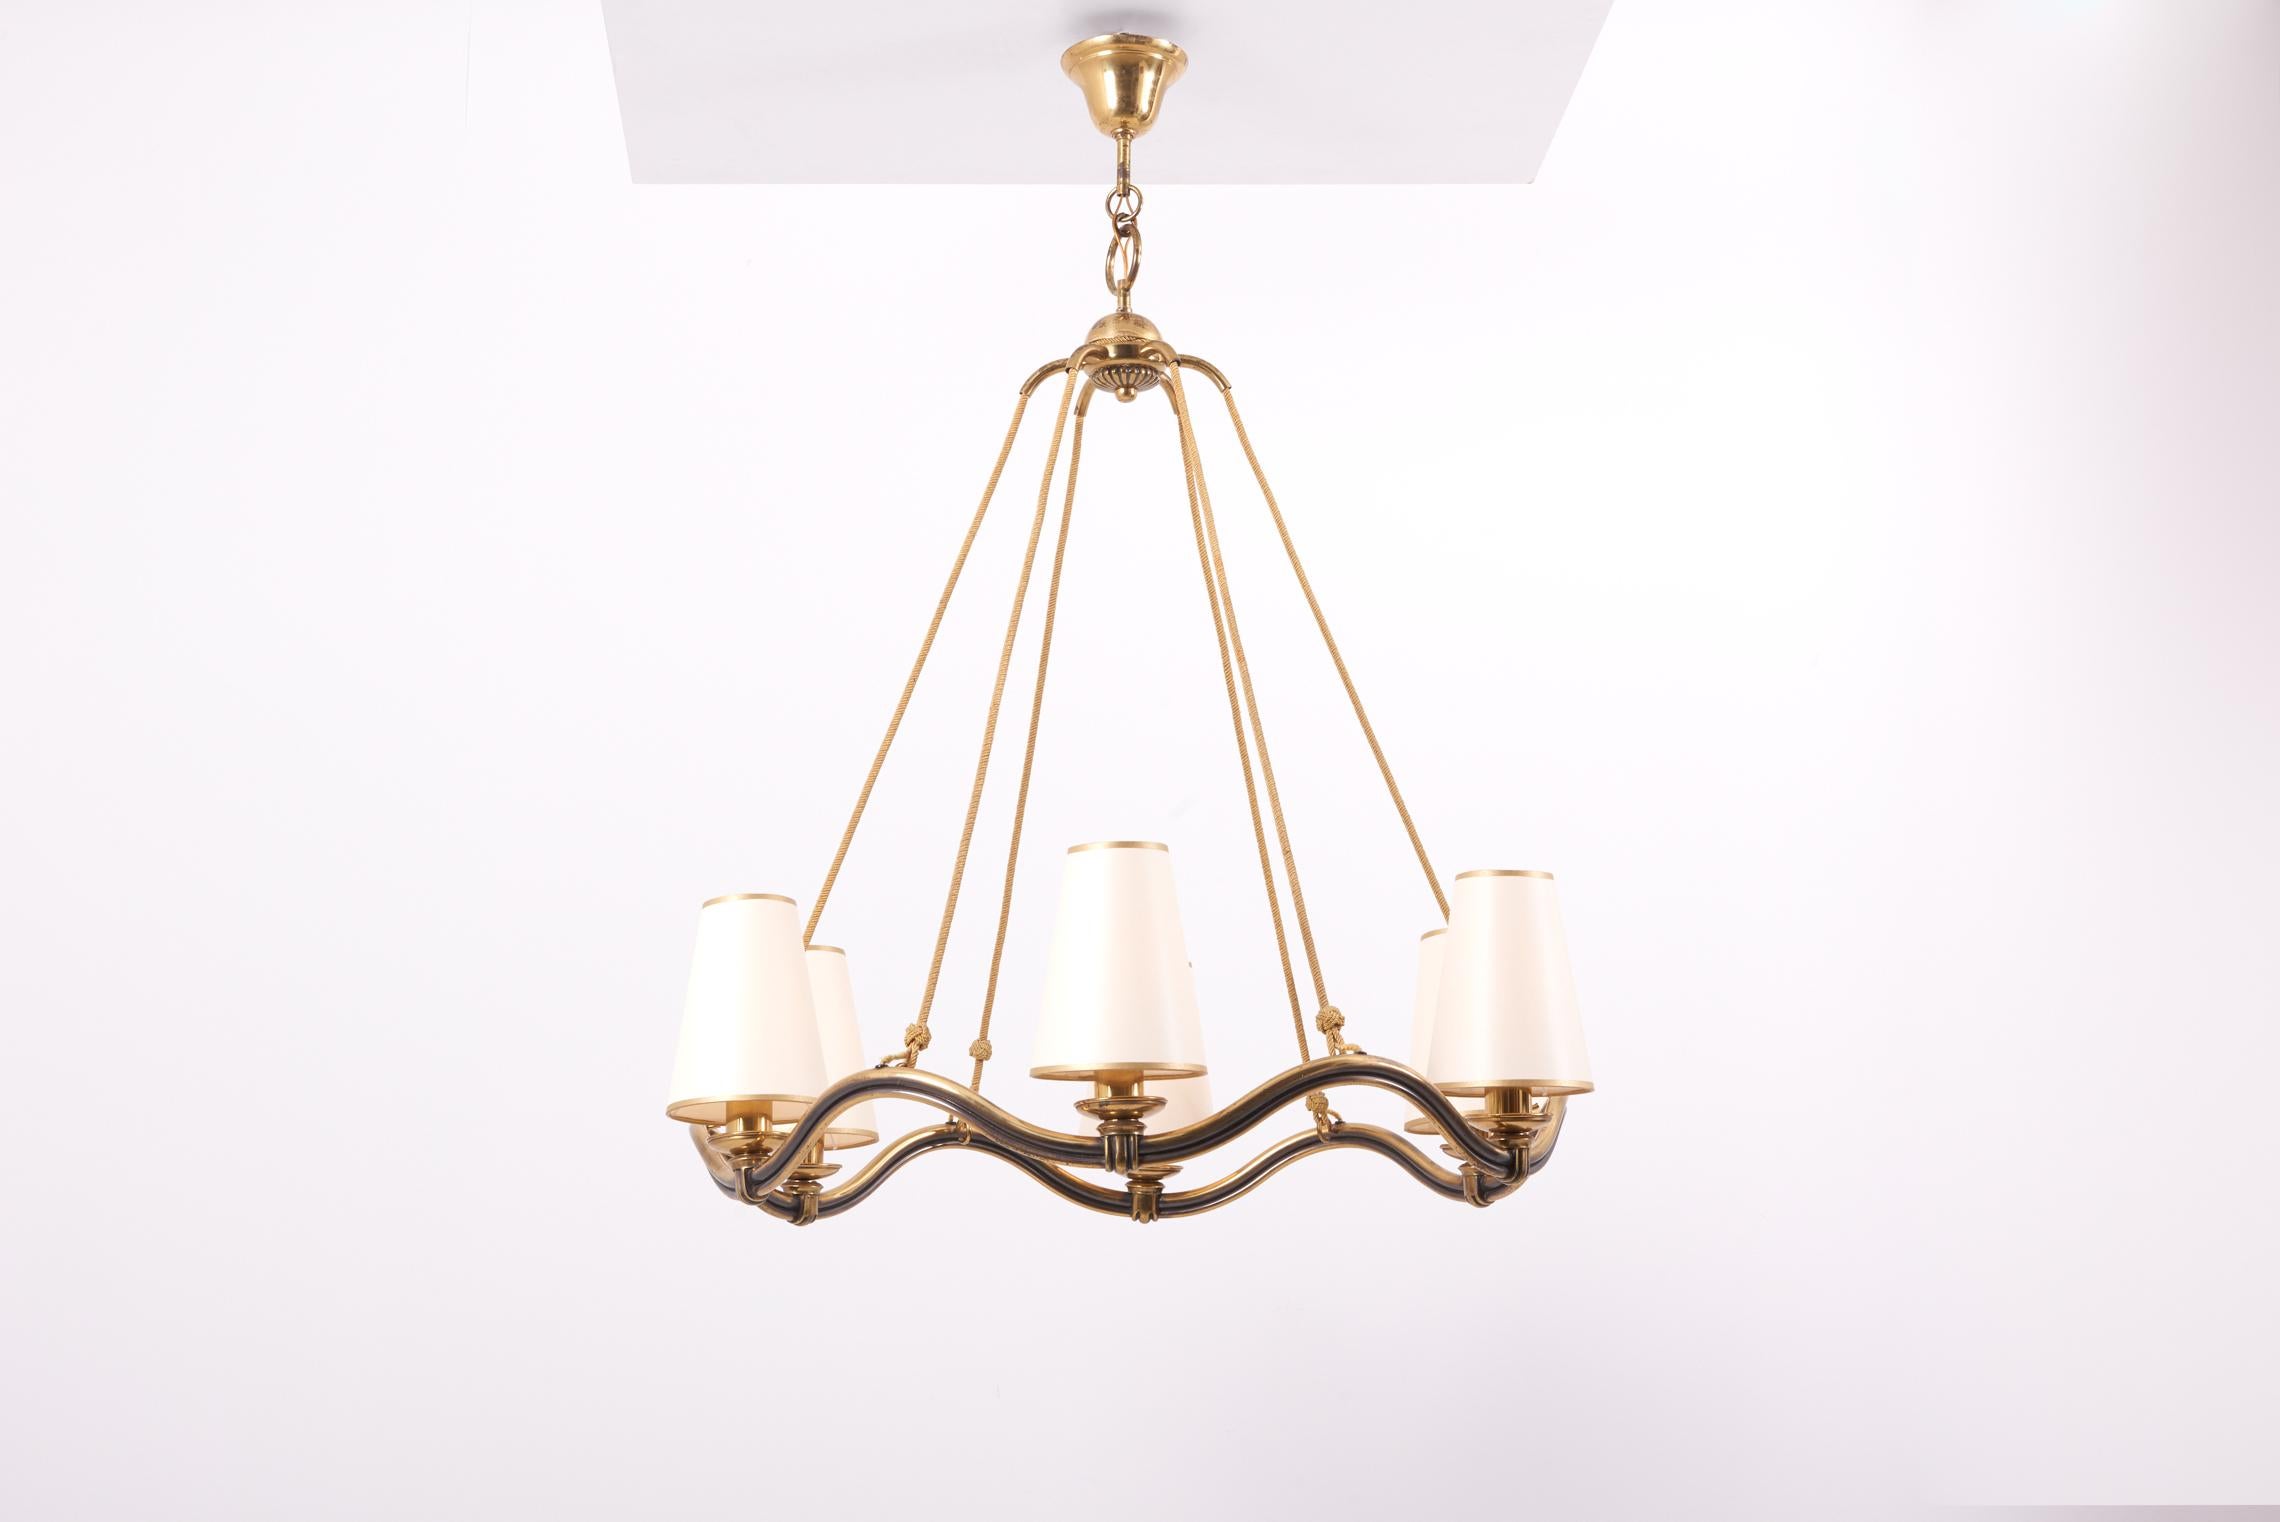 1930s Art Deco chandelier by Hugo Gorge, Austria.
Made of brass and including new custom lamp shades in cream chintz with golden paper edge.

6 x E27 sockets.

Please note: Lamp should be fitted professionally in accordance to local